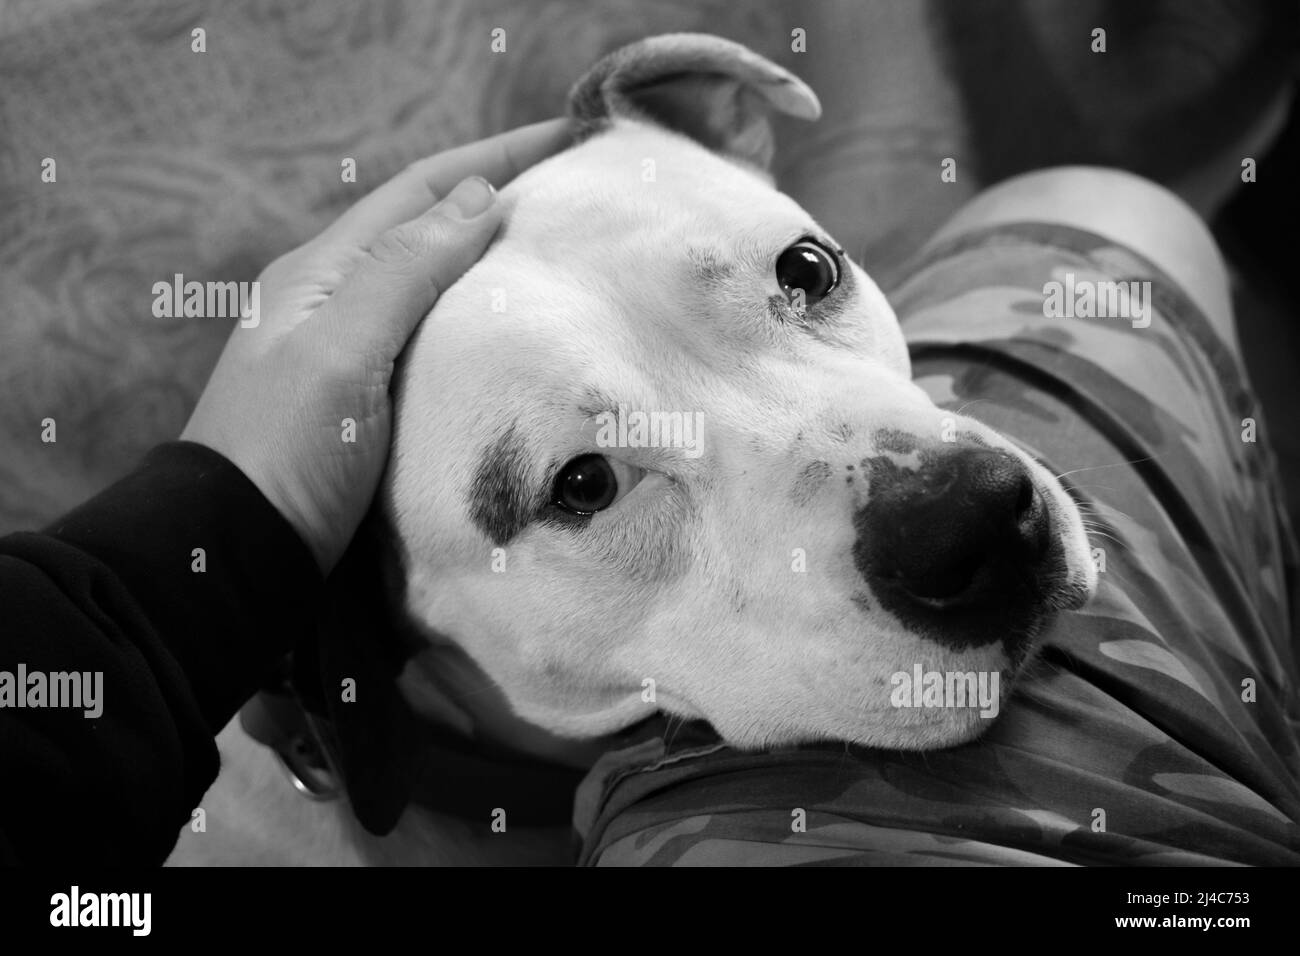 Sad eyes of a white pitbull dog as it lays head on a persons knee looking at the camera Stock Photo